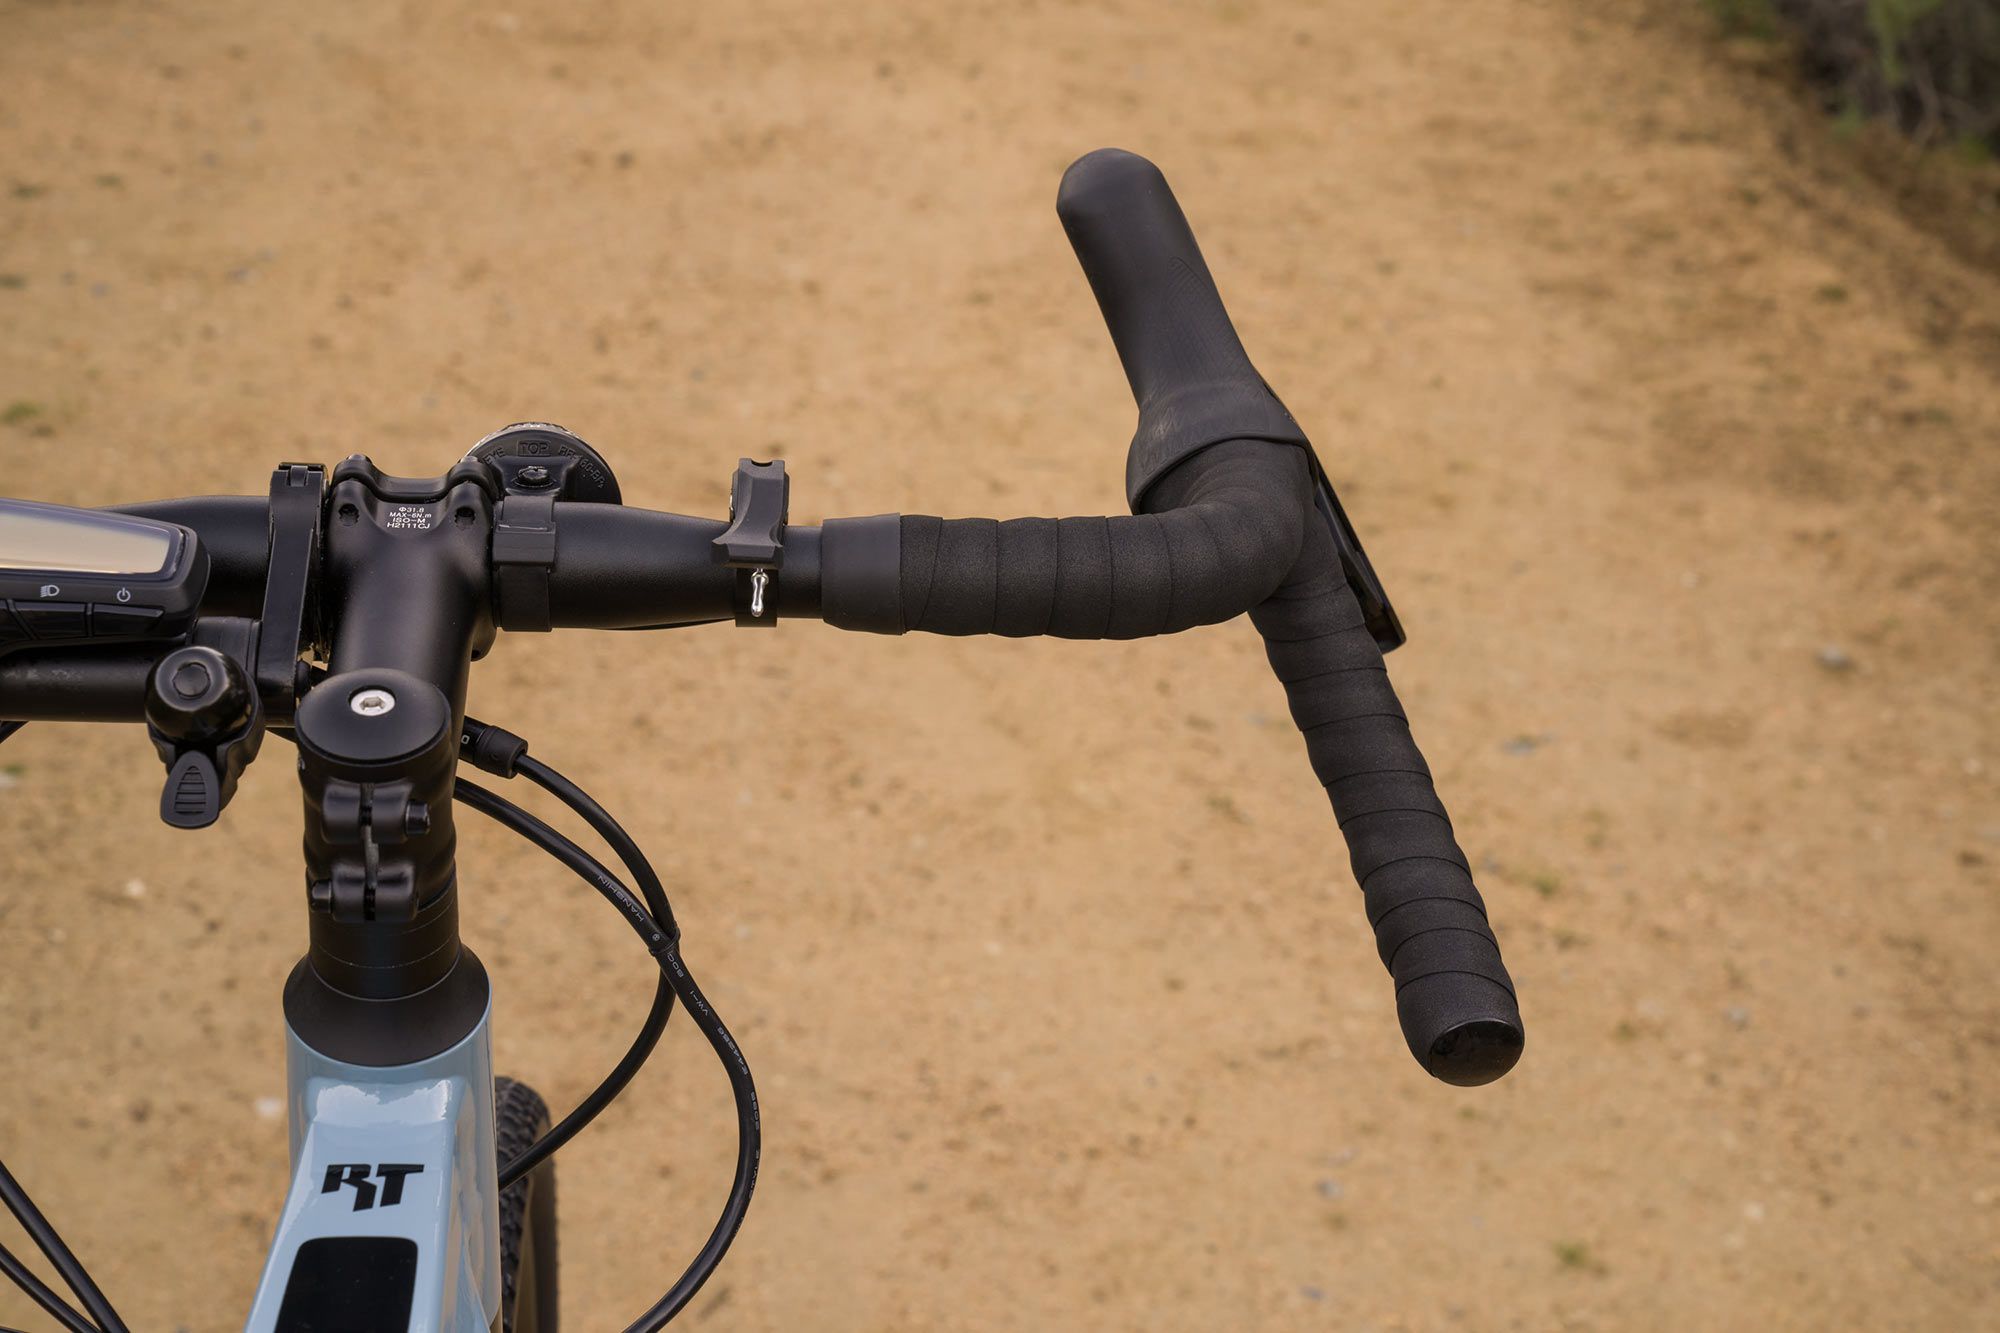 In typical road bicycle form, the Wabash RT employs aggressive ergonomics with a flared drop bar.